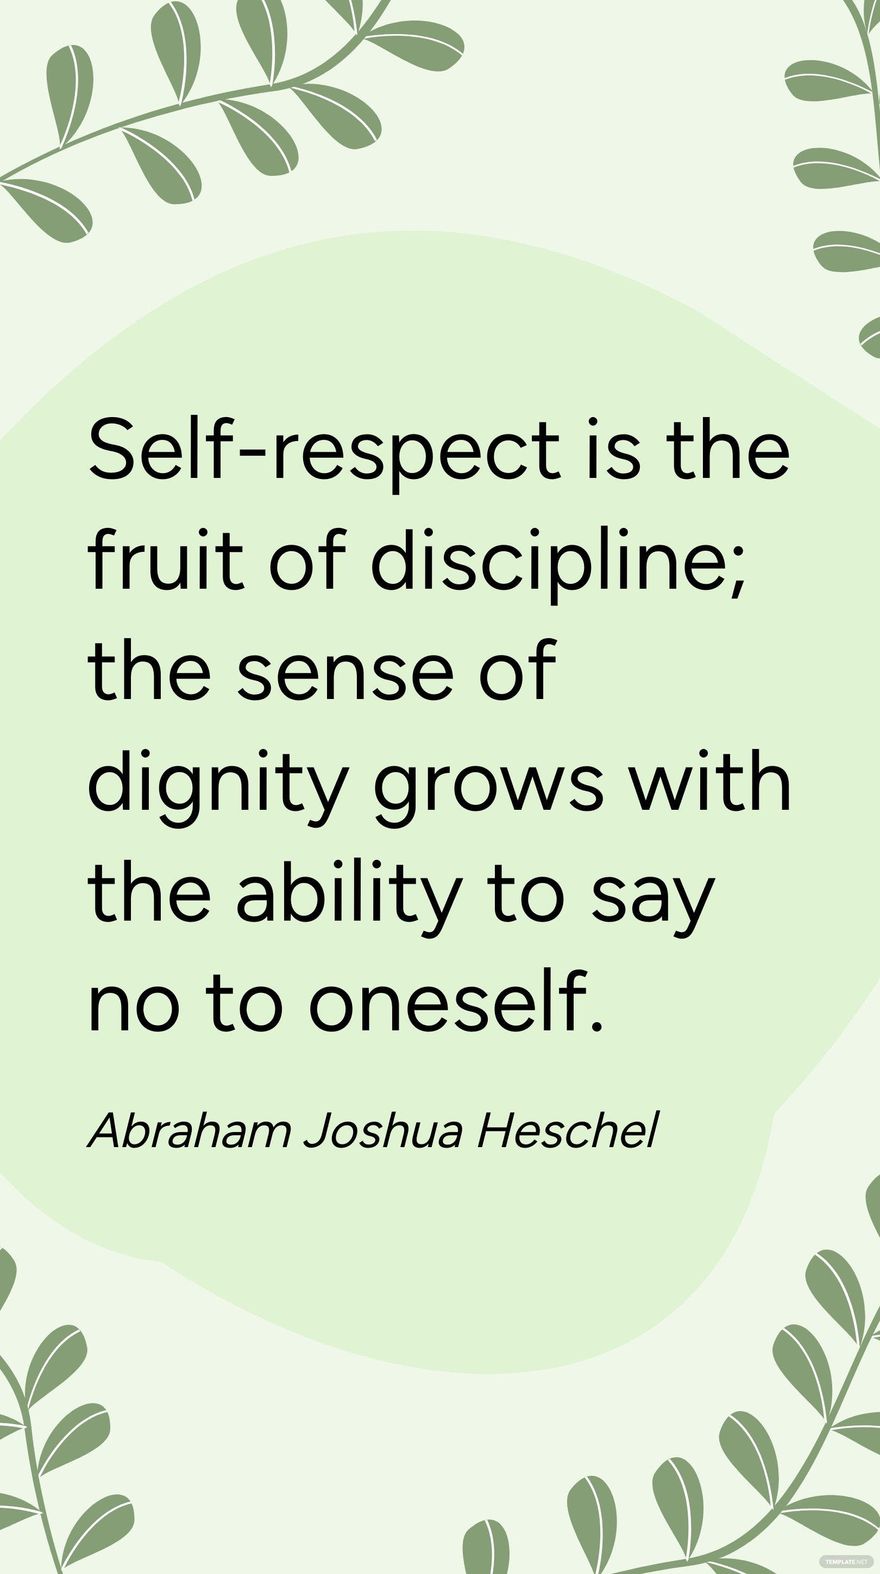 Abraham Joshua Heschel - Self-respect is the fruit of discipline; the sense of dignity grows with the ability to say no to oneself. in JPG